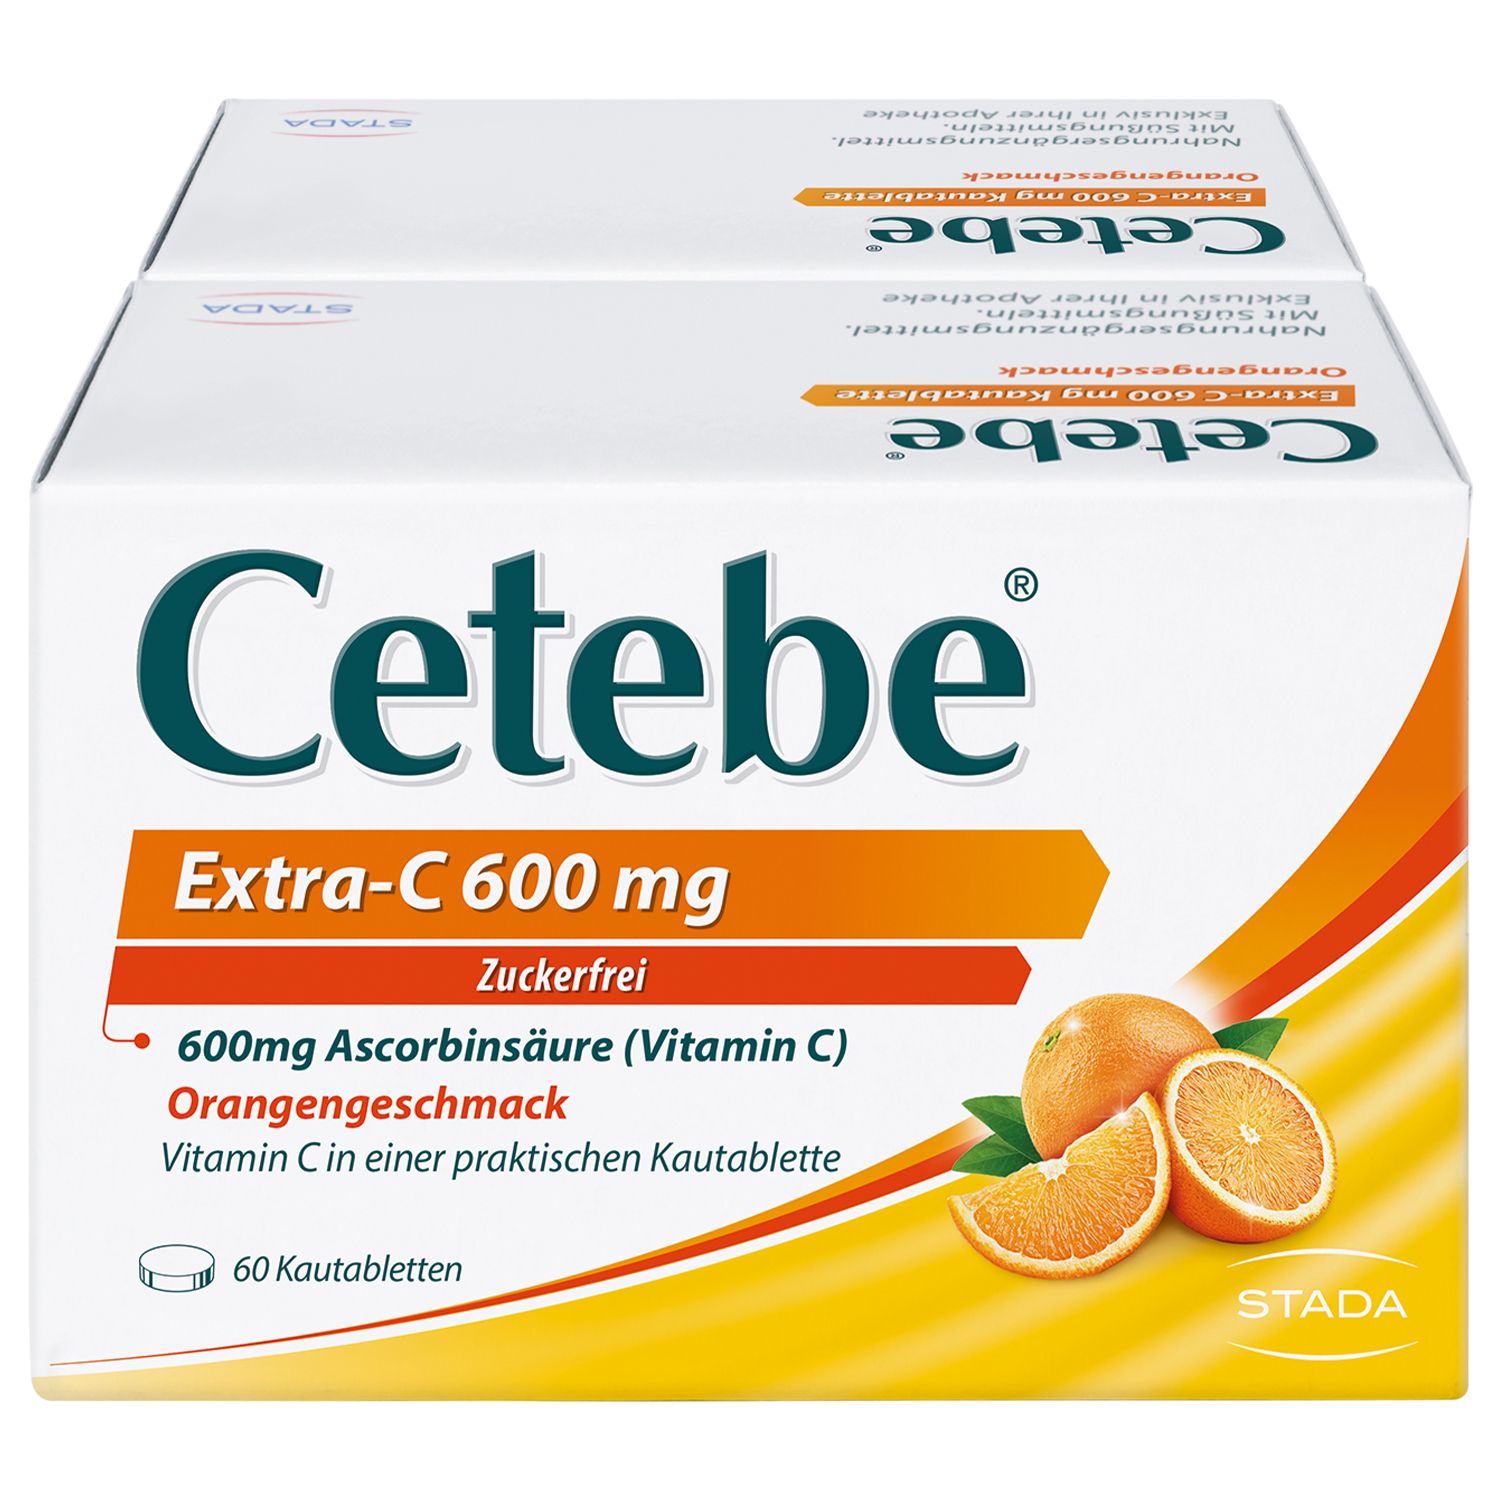 CeteBe® Extra-C 600 mg supports your immune defense with 600 mg vitamin C, orange taste